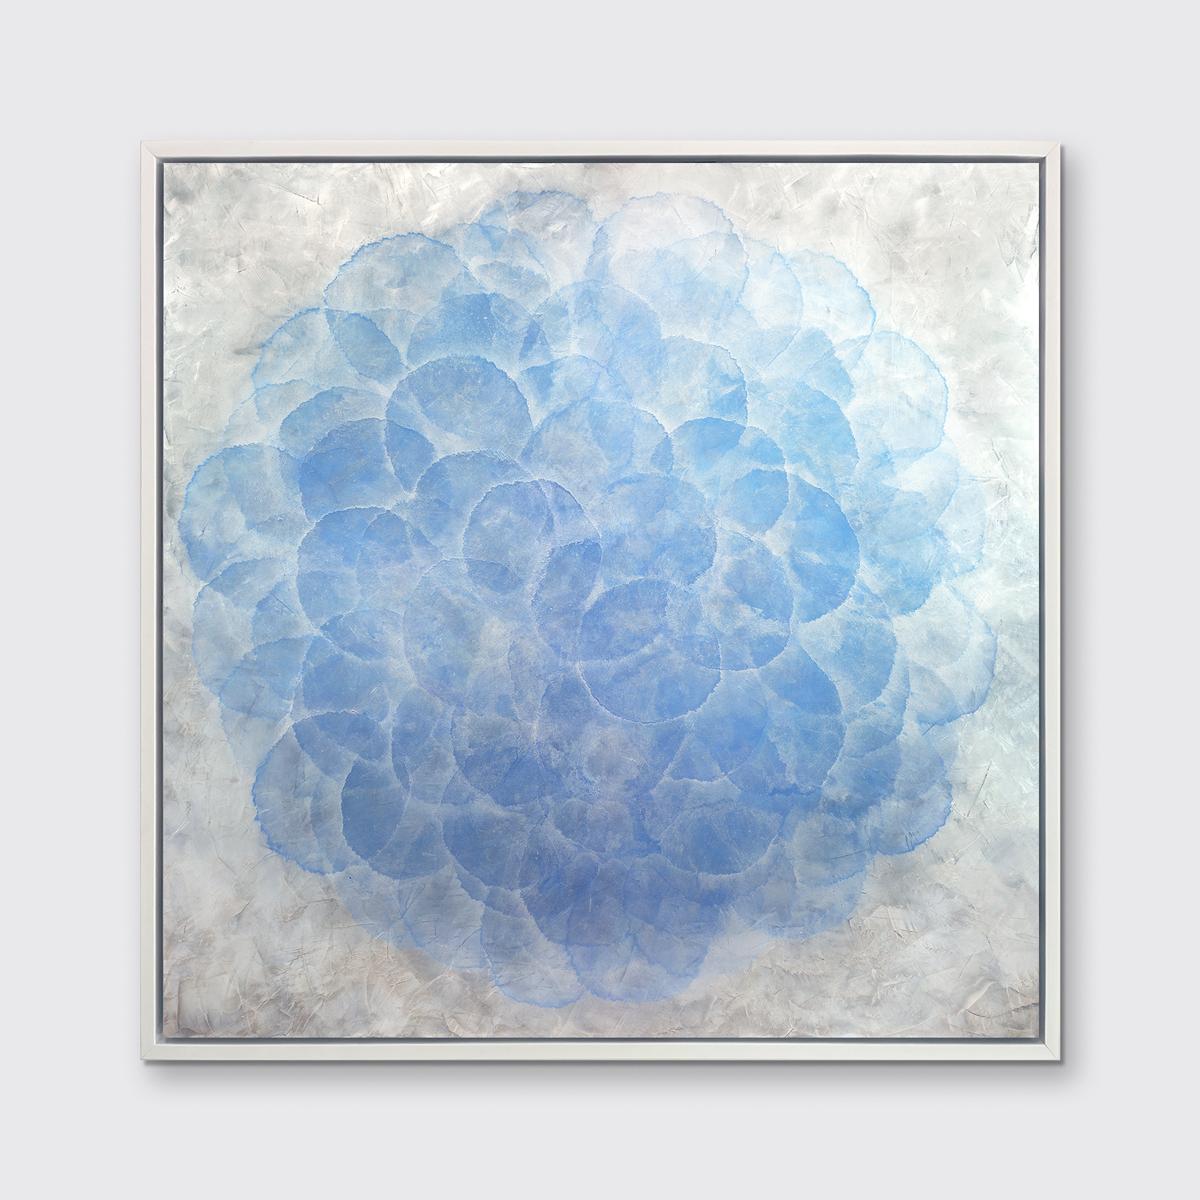 This Limited Edition giclee print by Roger Mudre features nearly transparent light blue circles, arranged in an overlapping pattern to create a larger circle shape. The outer layer of the circle blends into the surrounding silver-grey background and